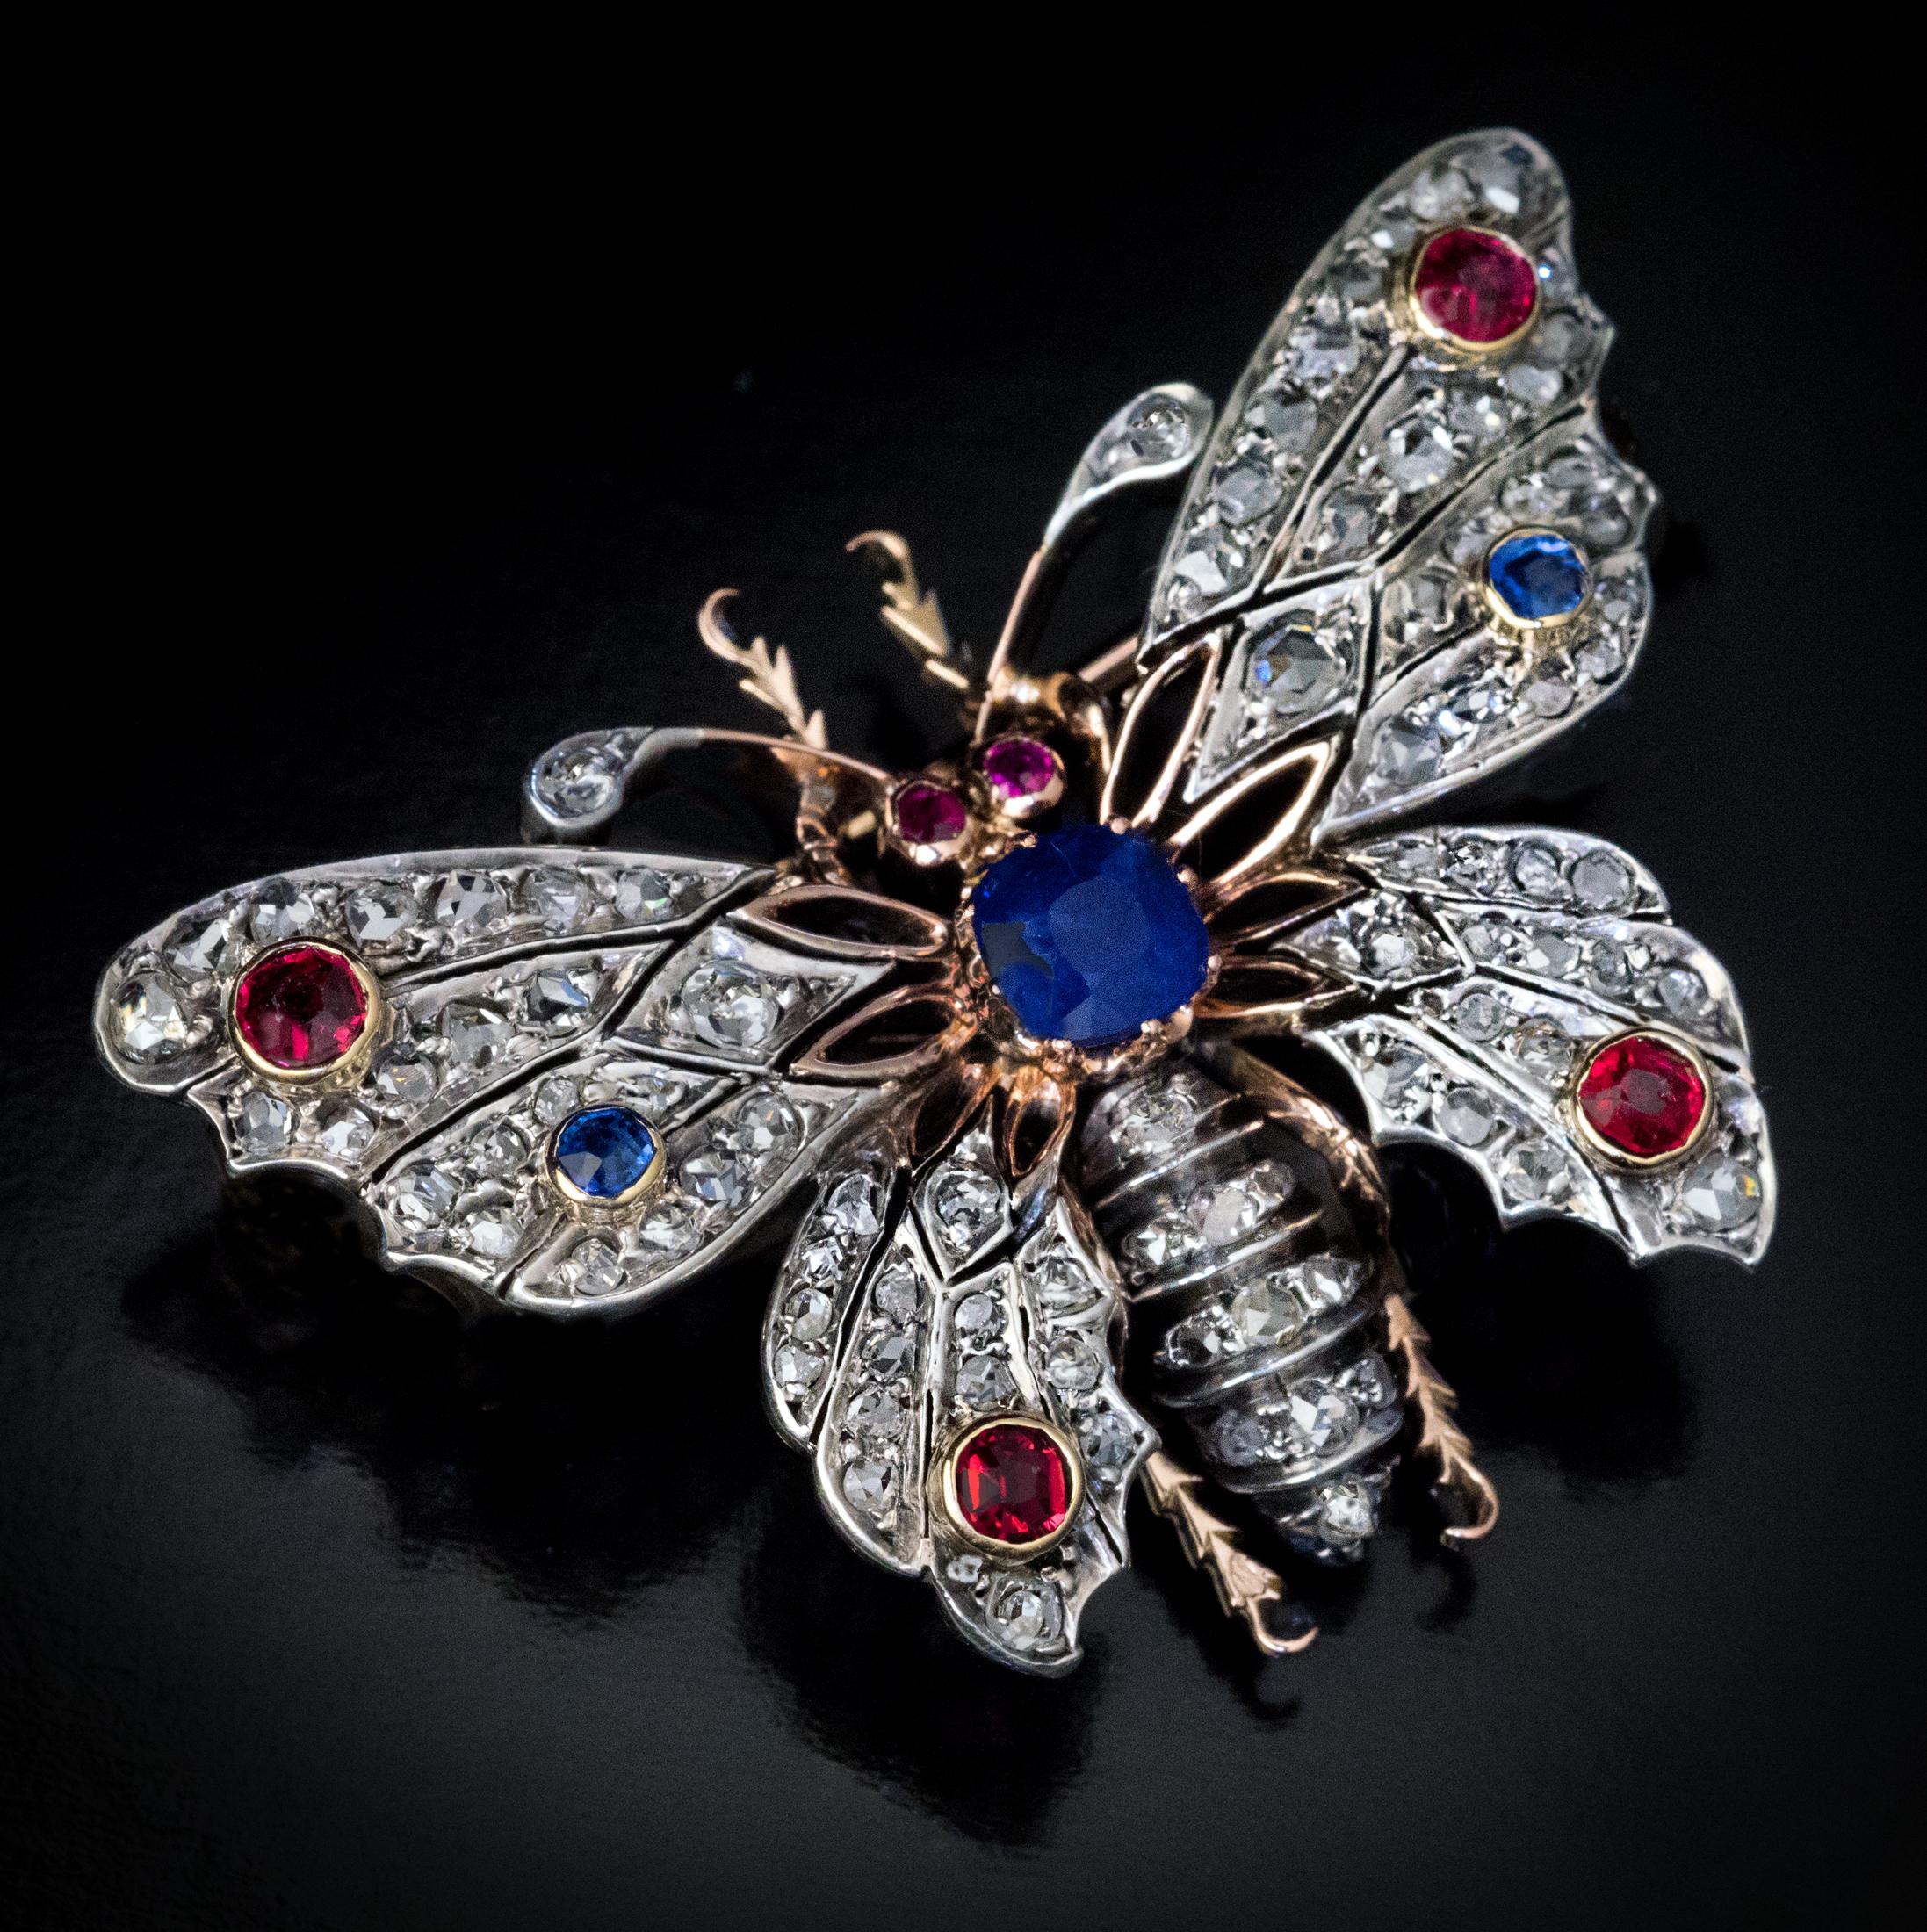 France, circa 1890s
The brooch is finely modeled as a butterfly. It is handcrafted in silver-topped 18K gold and is encrusted with rose cut diamonds, sapphires and rubies. The principal velvety blue sapphire (1.15 carats) is a natural untreated